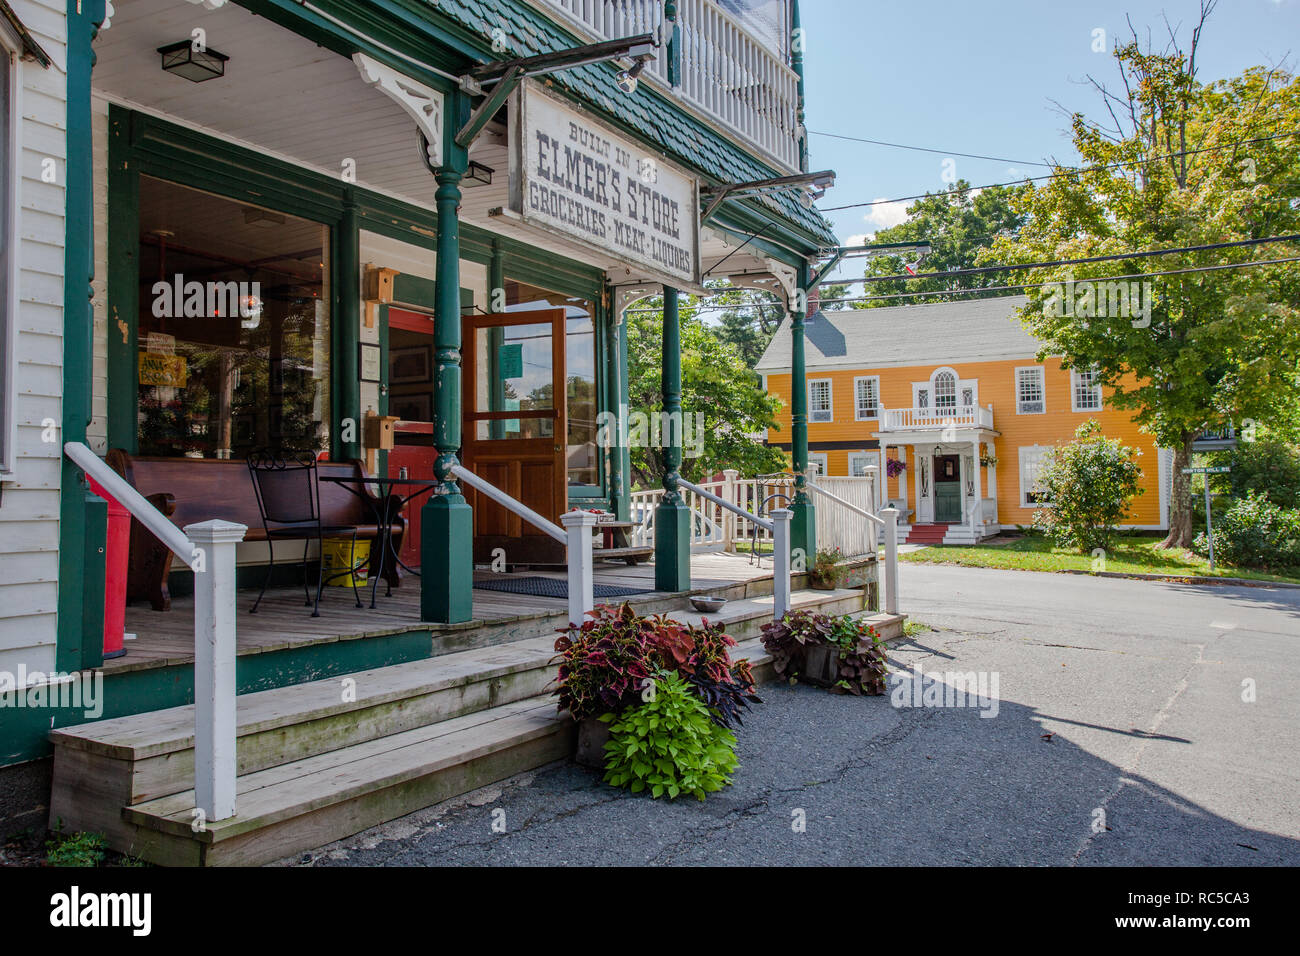 Elmers Country Store, MA Banque D'Images